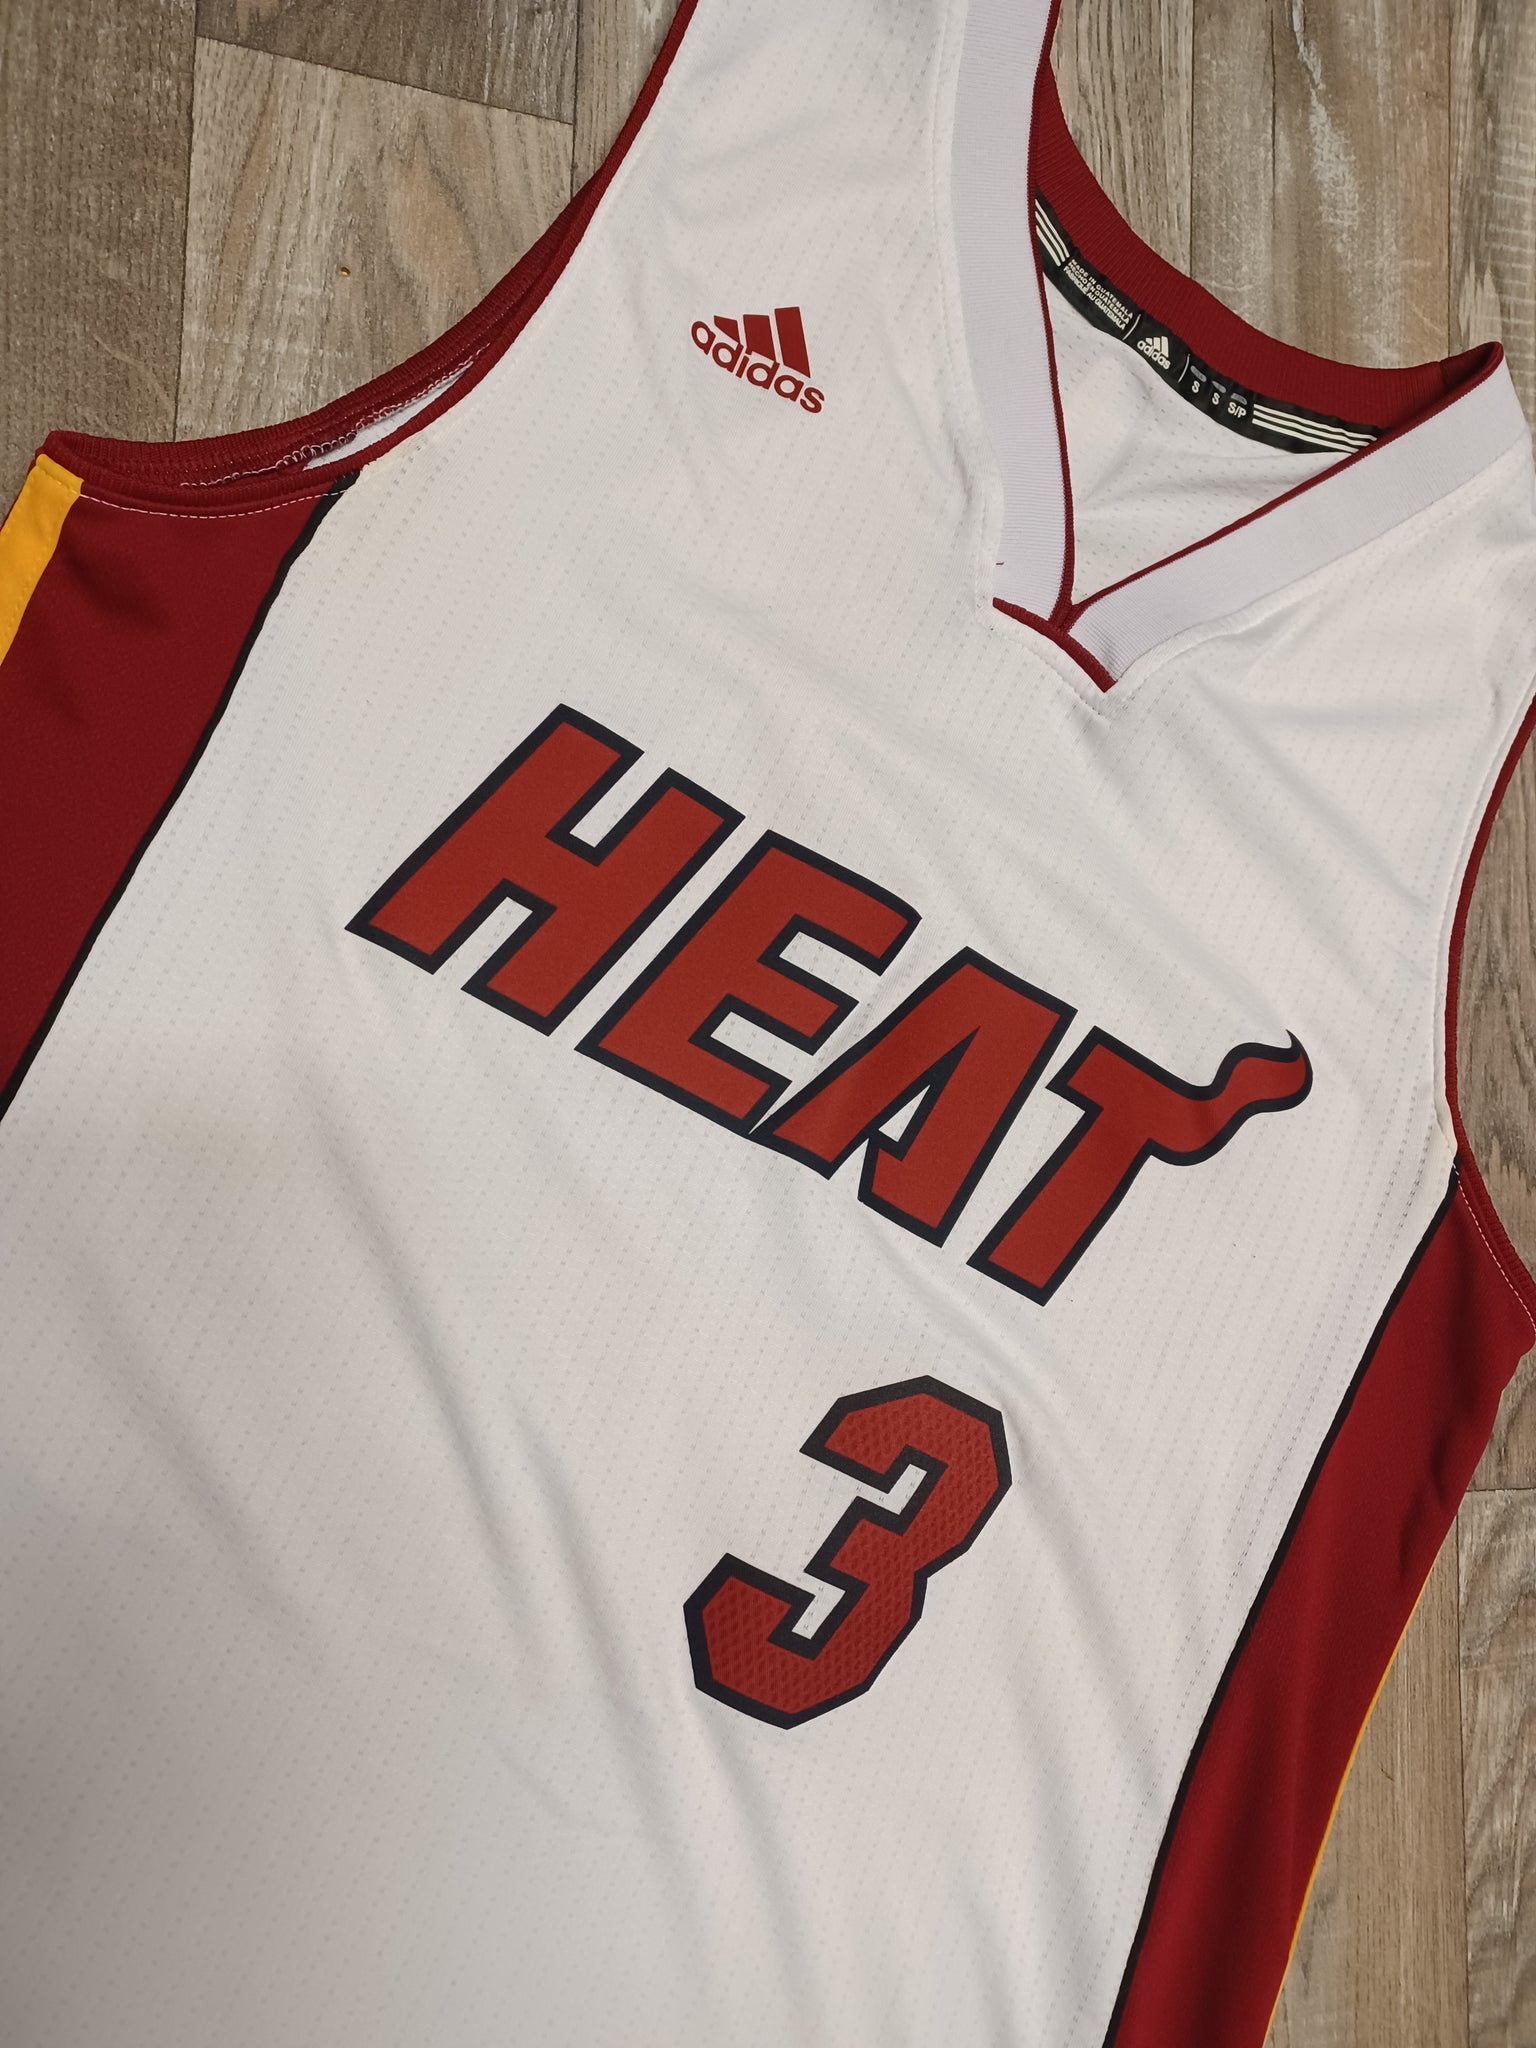 🏀 Wade Miami Heat Jersey Size Small – Throwback 🏀